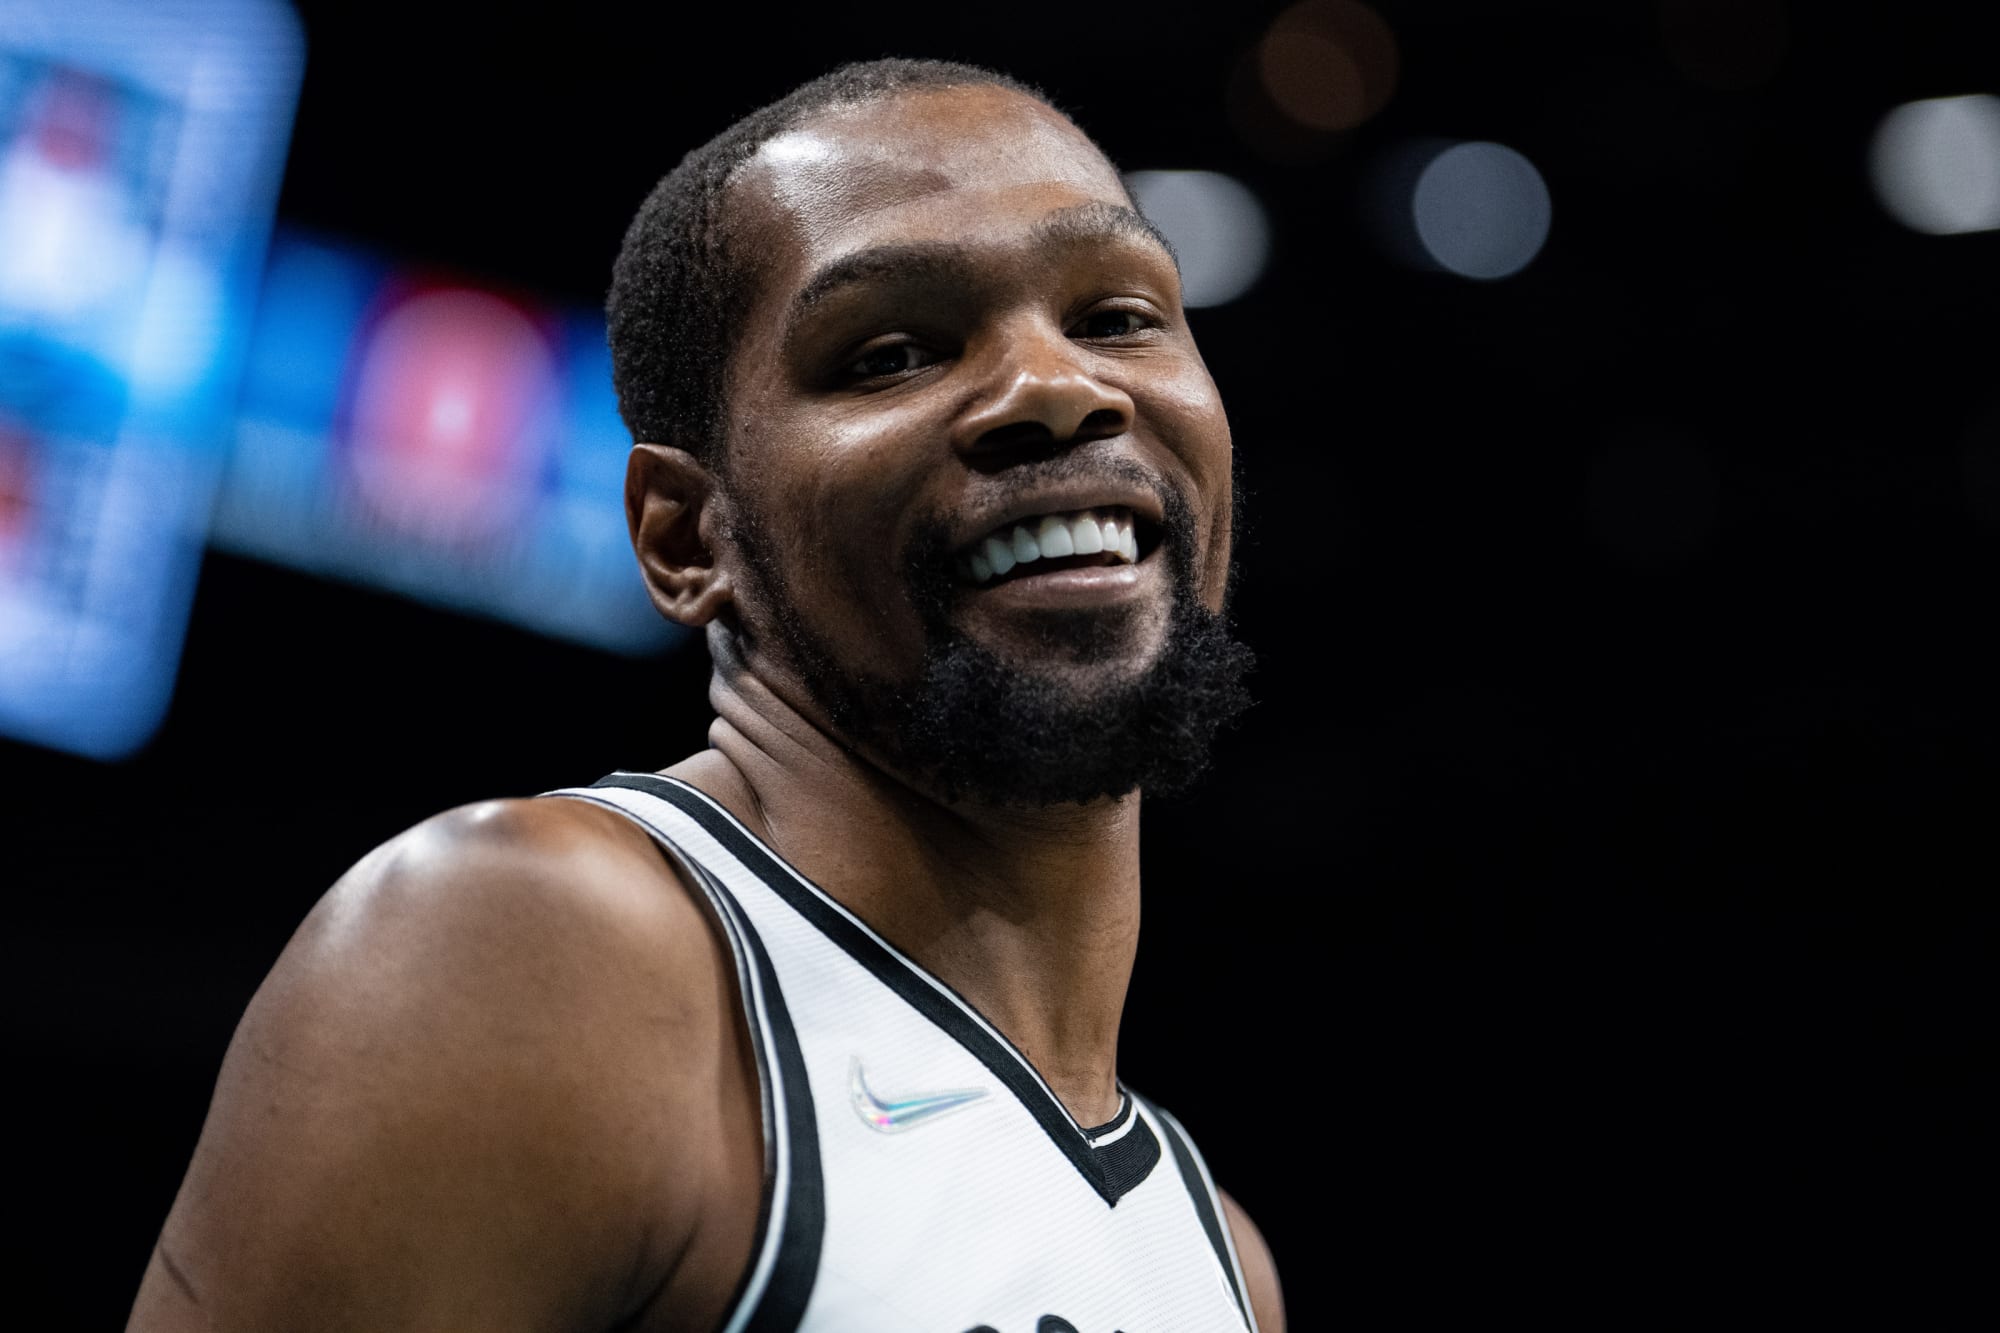 NBA insider: Nets sought after an absurd package deal from the Timberwolves for Kevin Durant